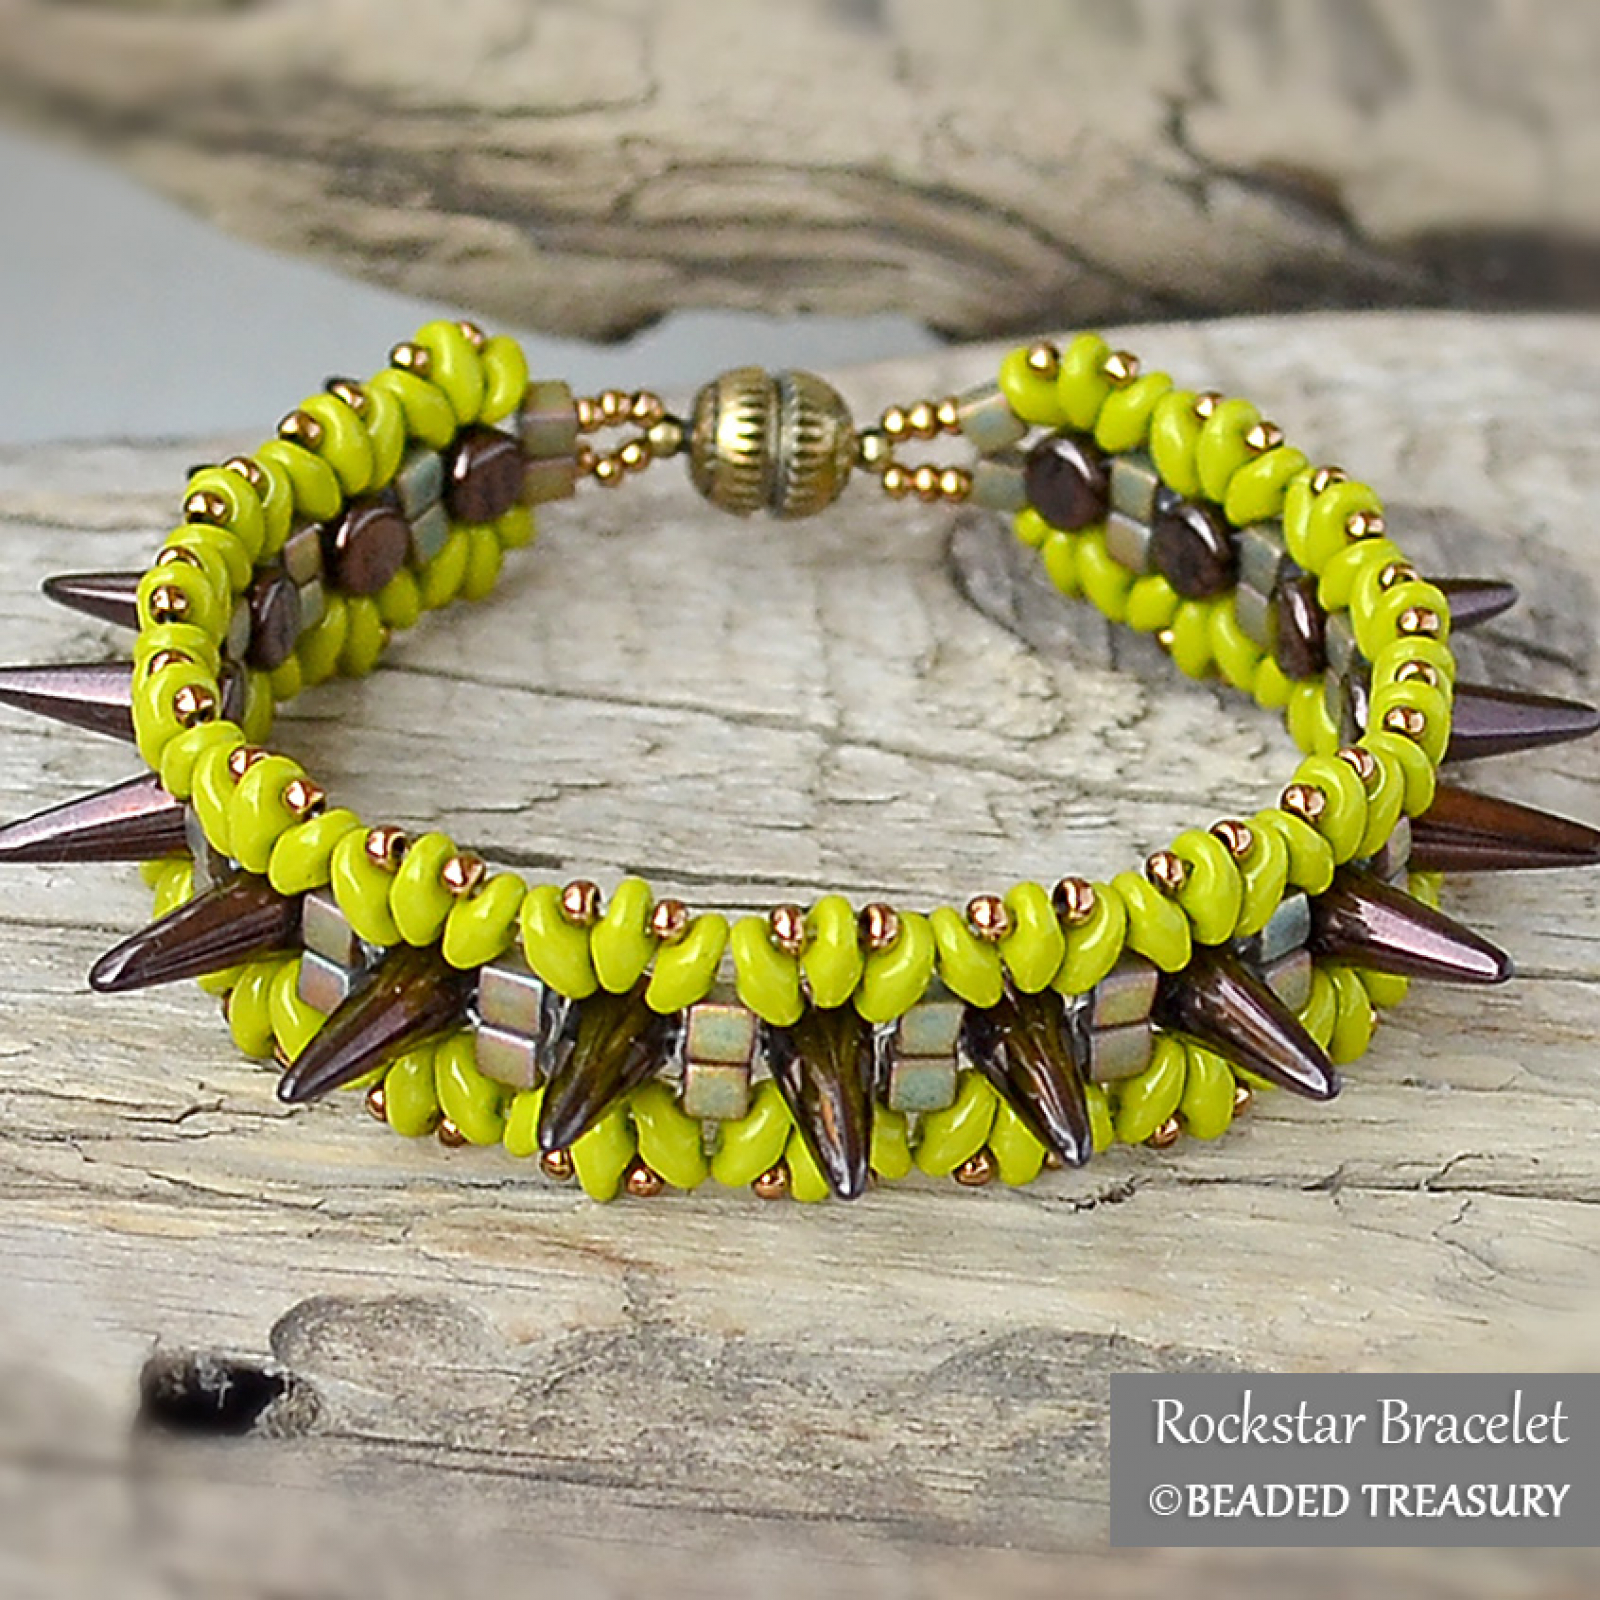 ROCKSTAR - beaded bracelet pattern with spike and superduo beads